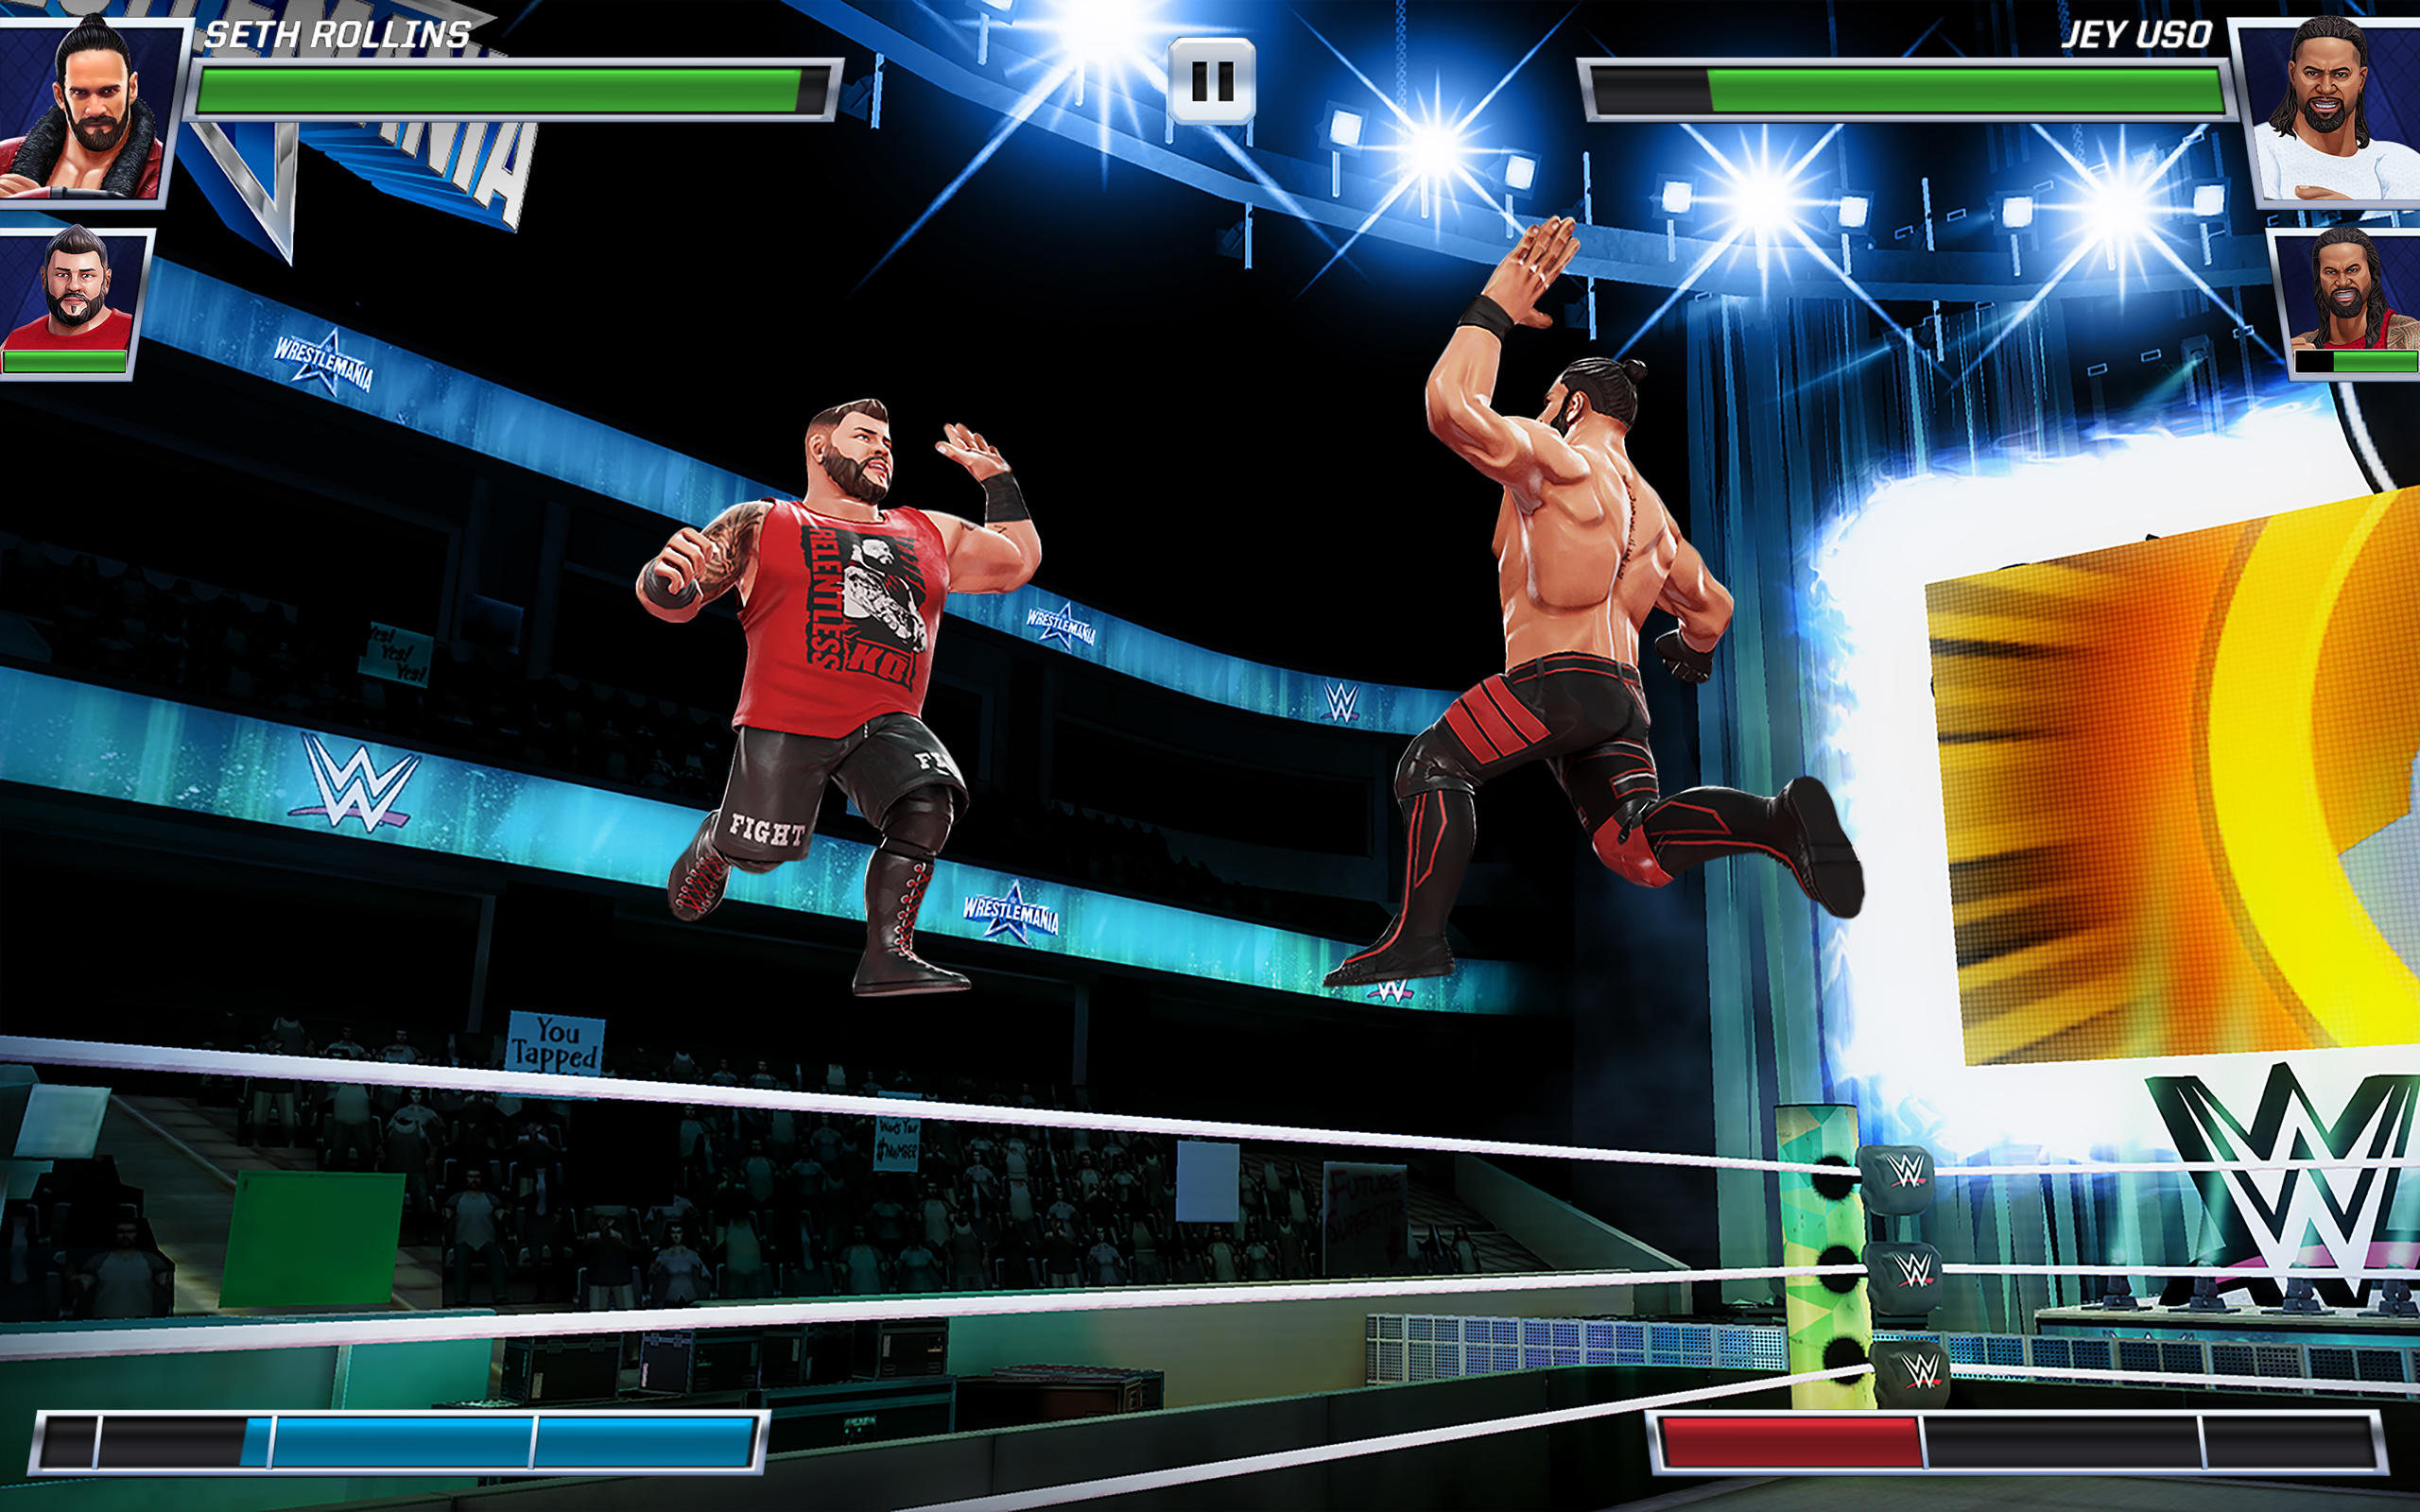 WWE 2K22 Mobile - Download & Play WWE 2K22 on Android APK & iOS